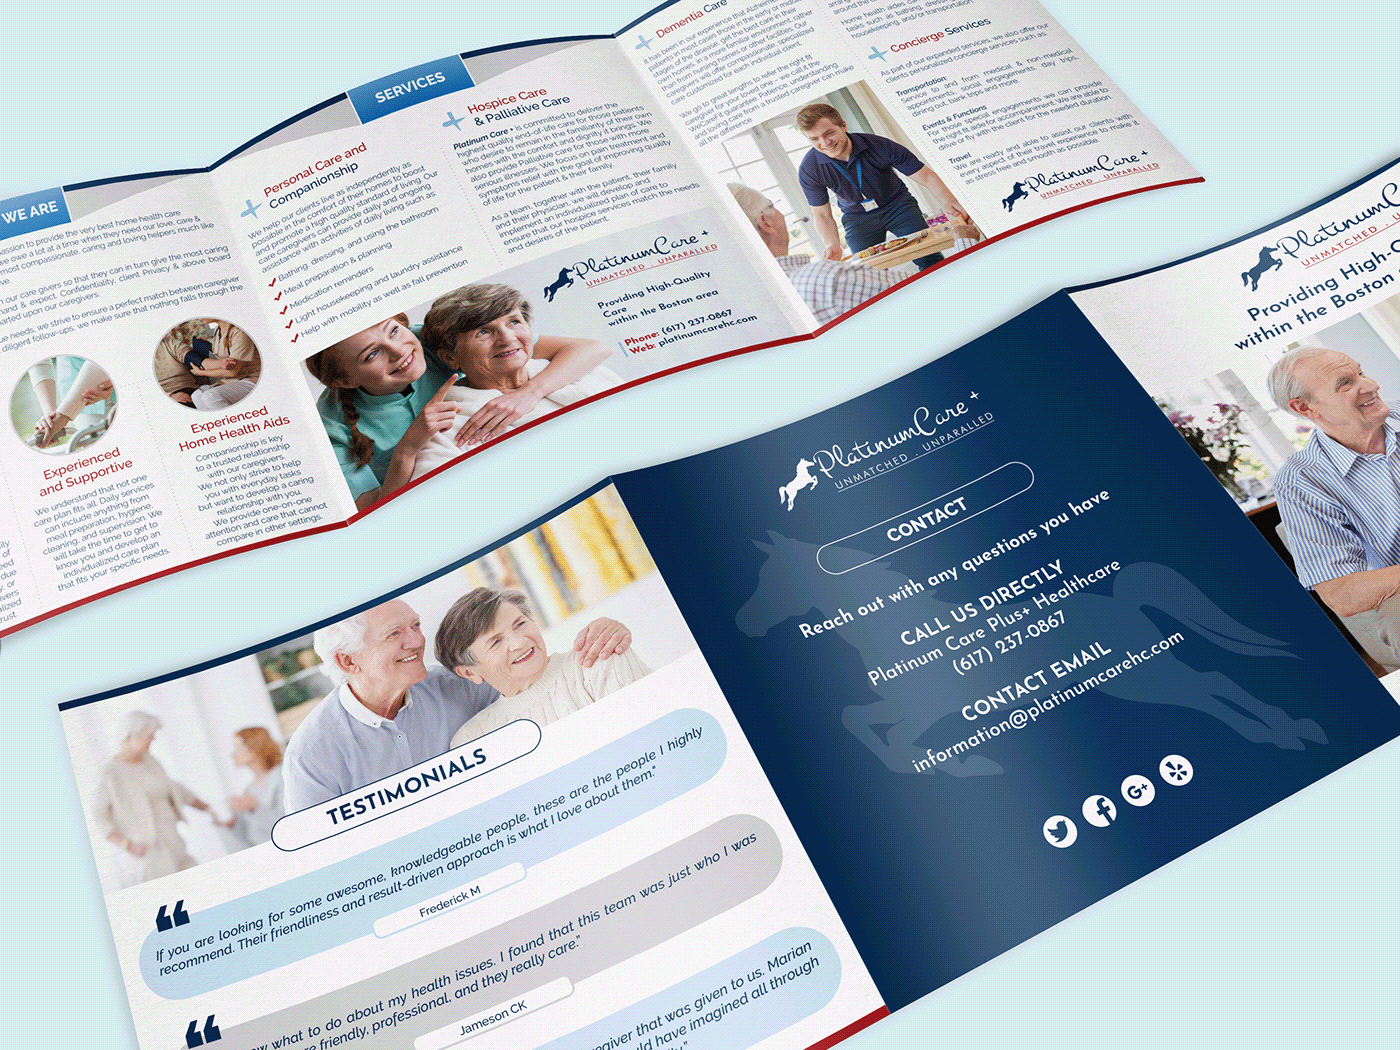 Square Trifold Brochure about Home Health Care Services for Elderly by Elivera Designs